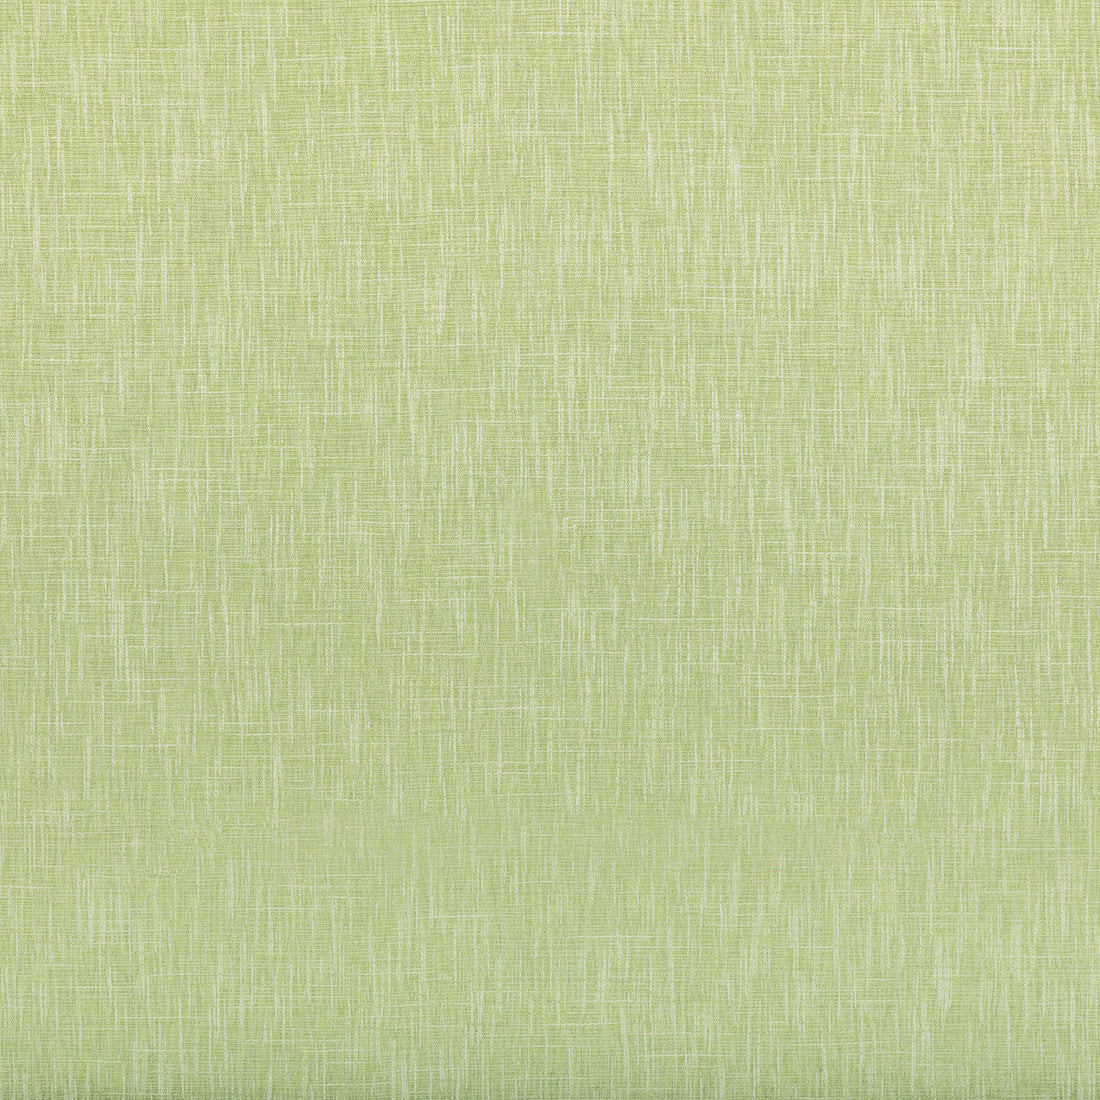 Maris fabric in pear color - pattern 35923.3.0 - by Kravet Basics in the Monterey collection